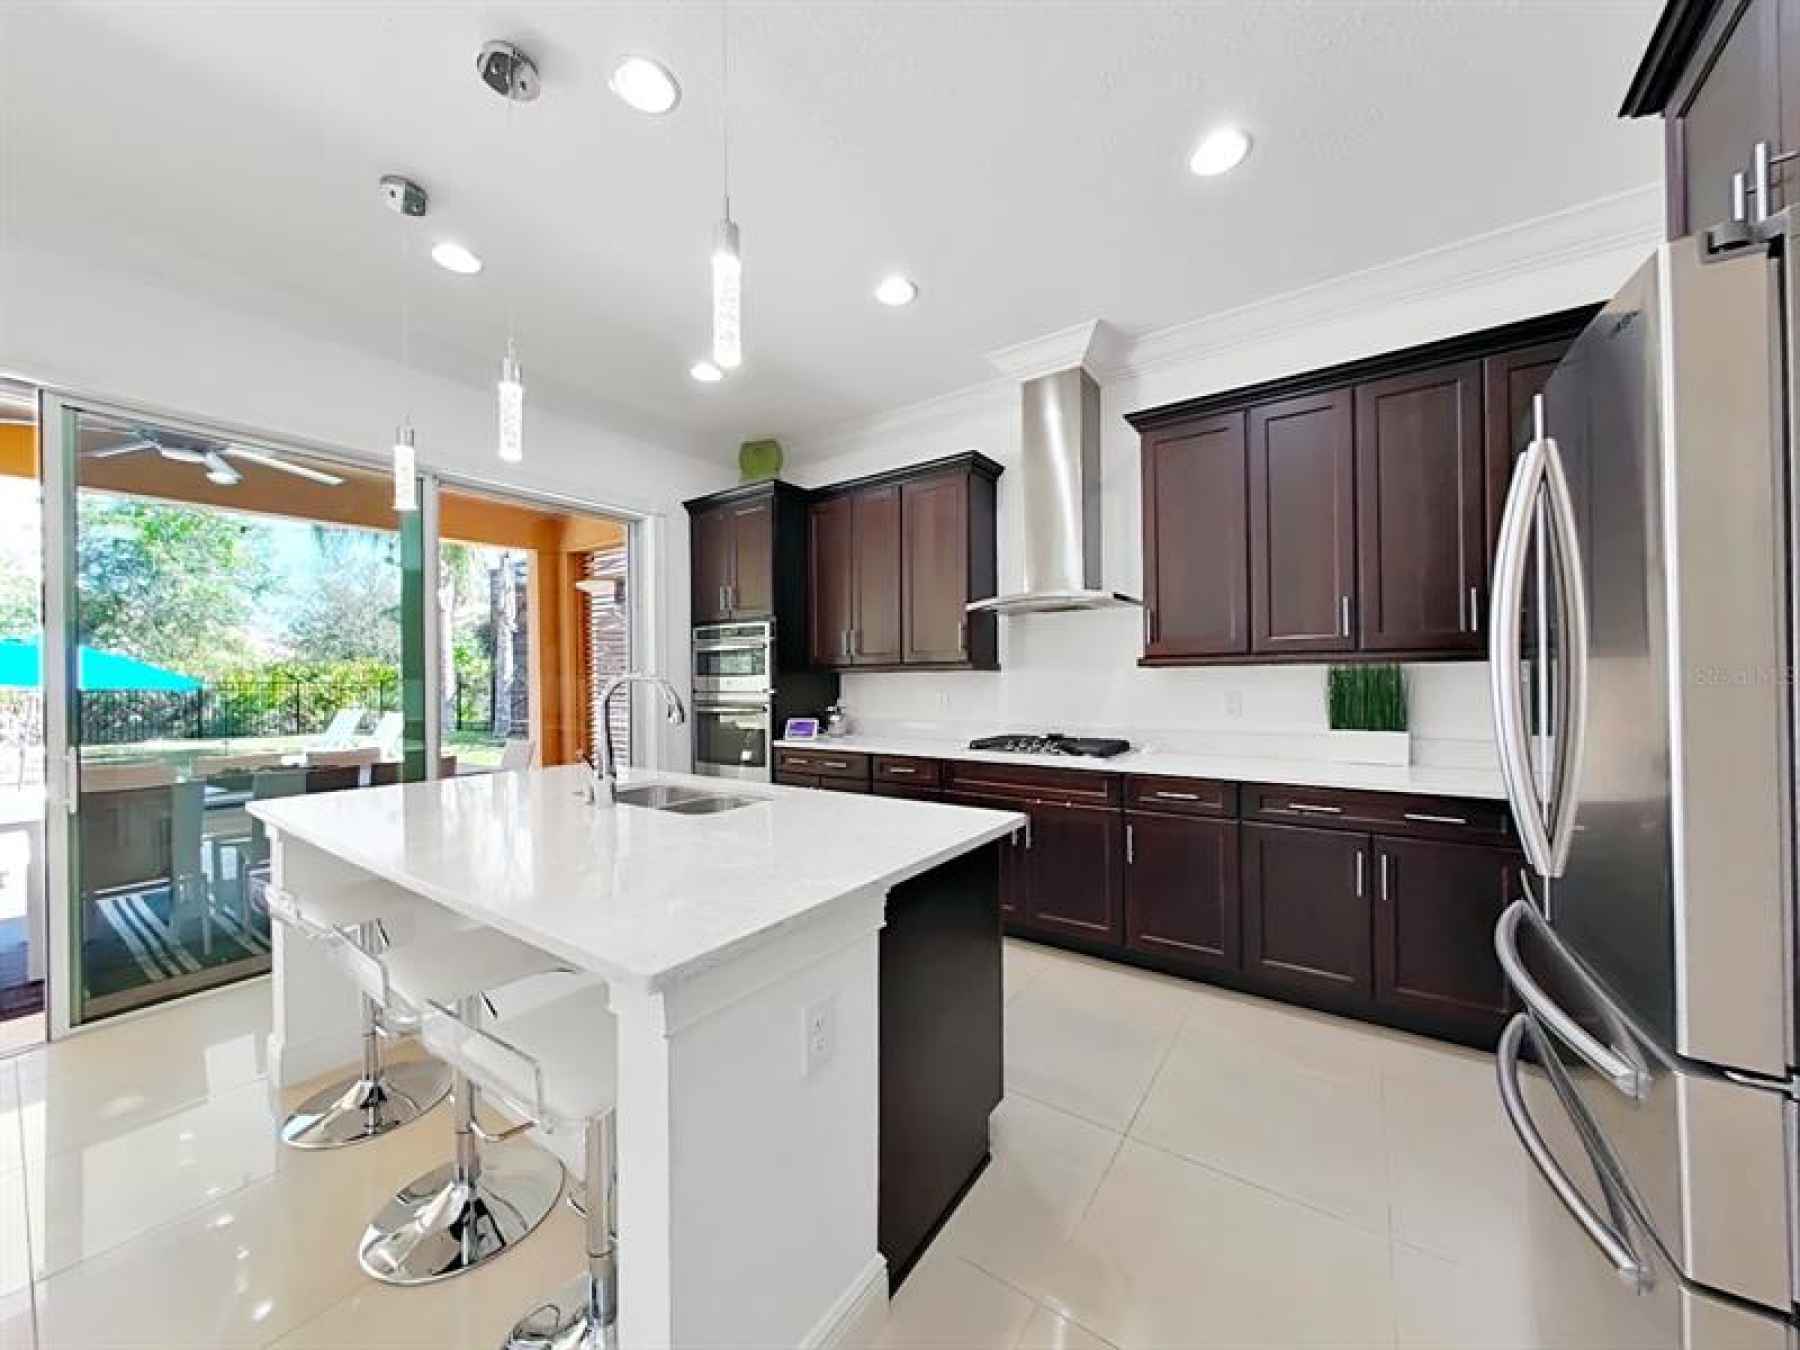 Modern kitchen with Quartz, pendant lights, natural gas cooktop, stainless steel range hood and Fren